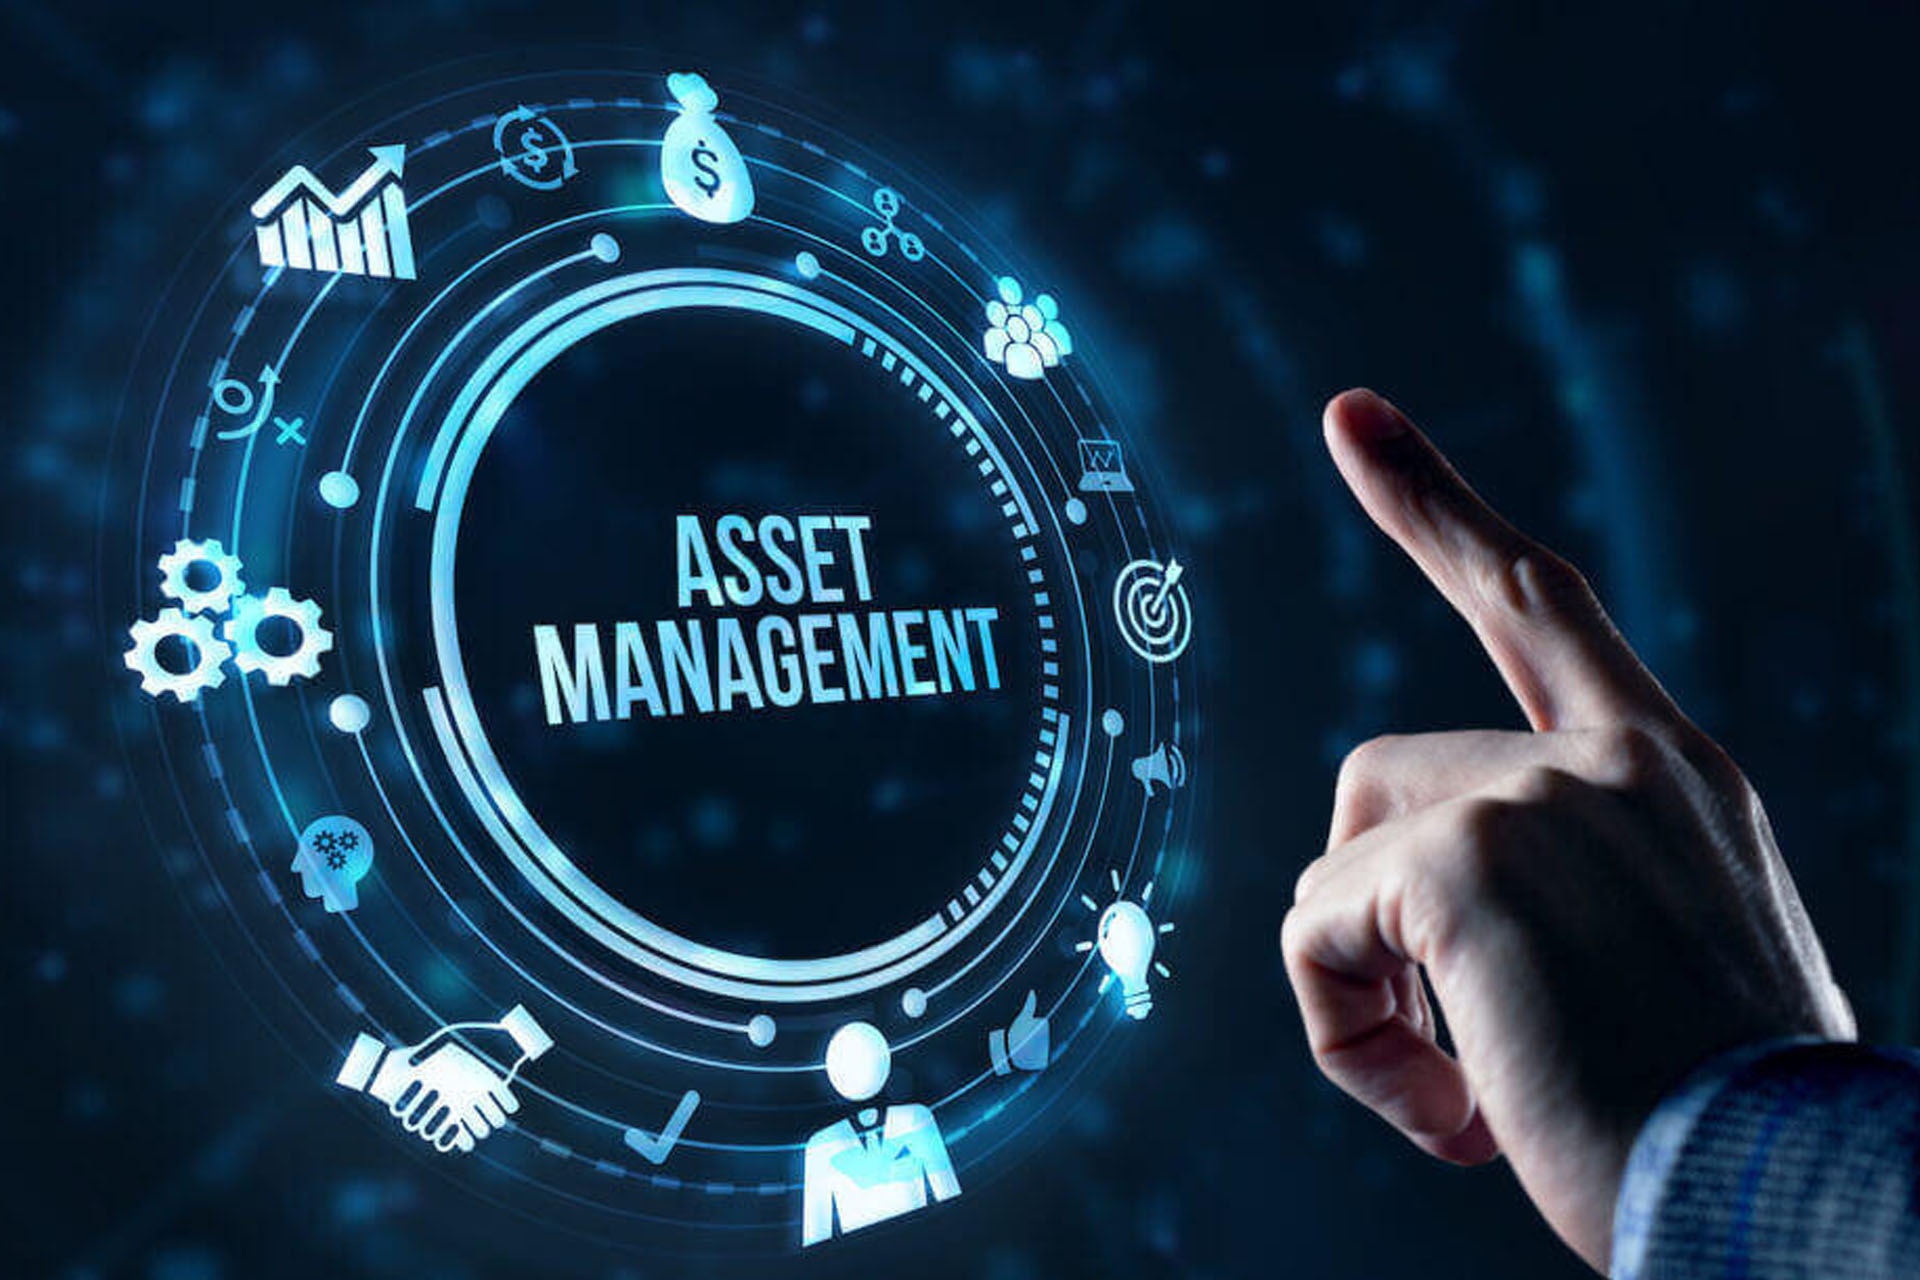 You can get a job as Asset Manager